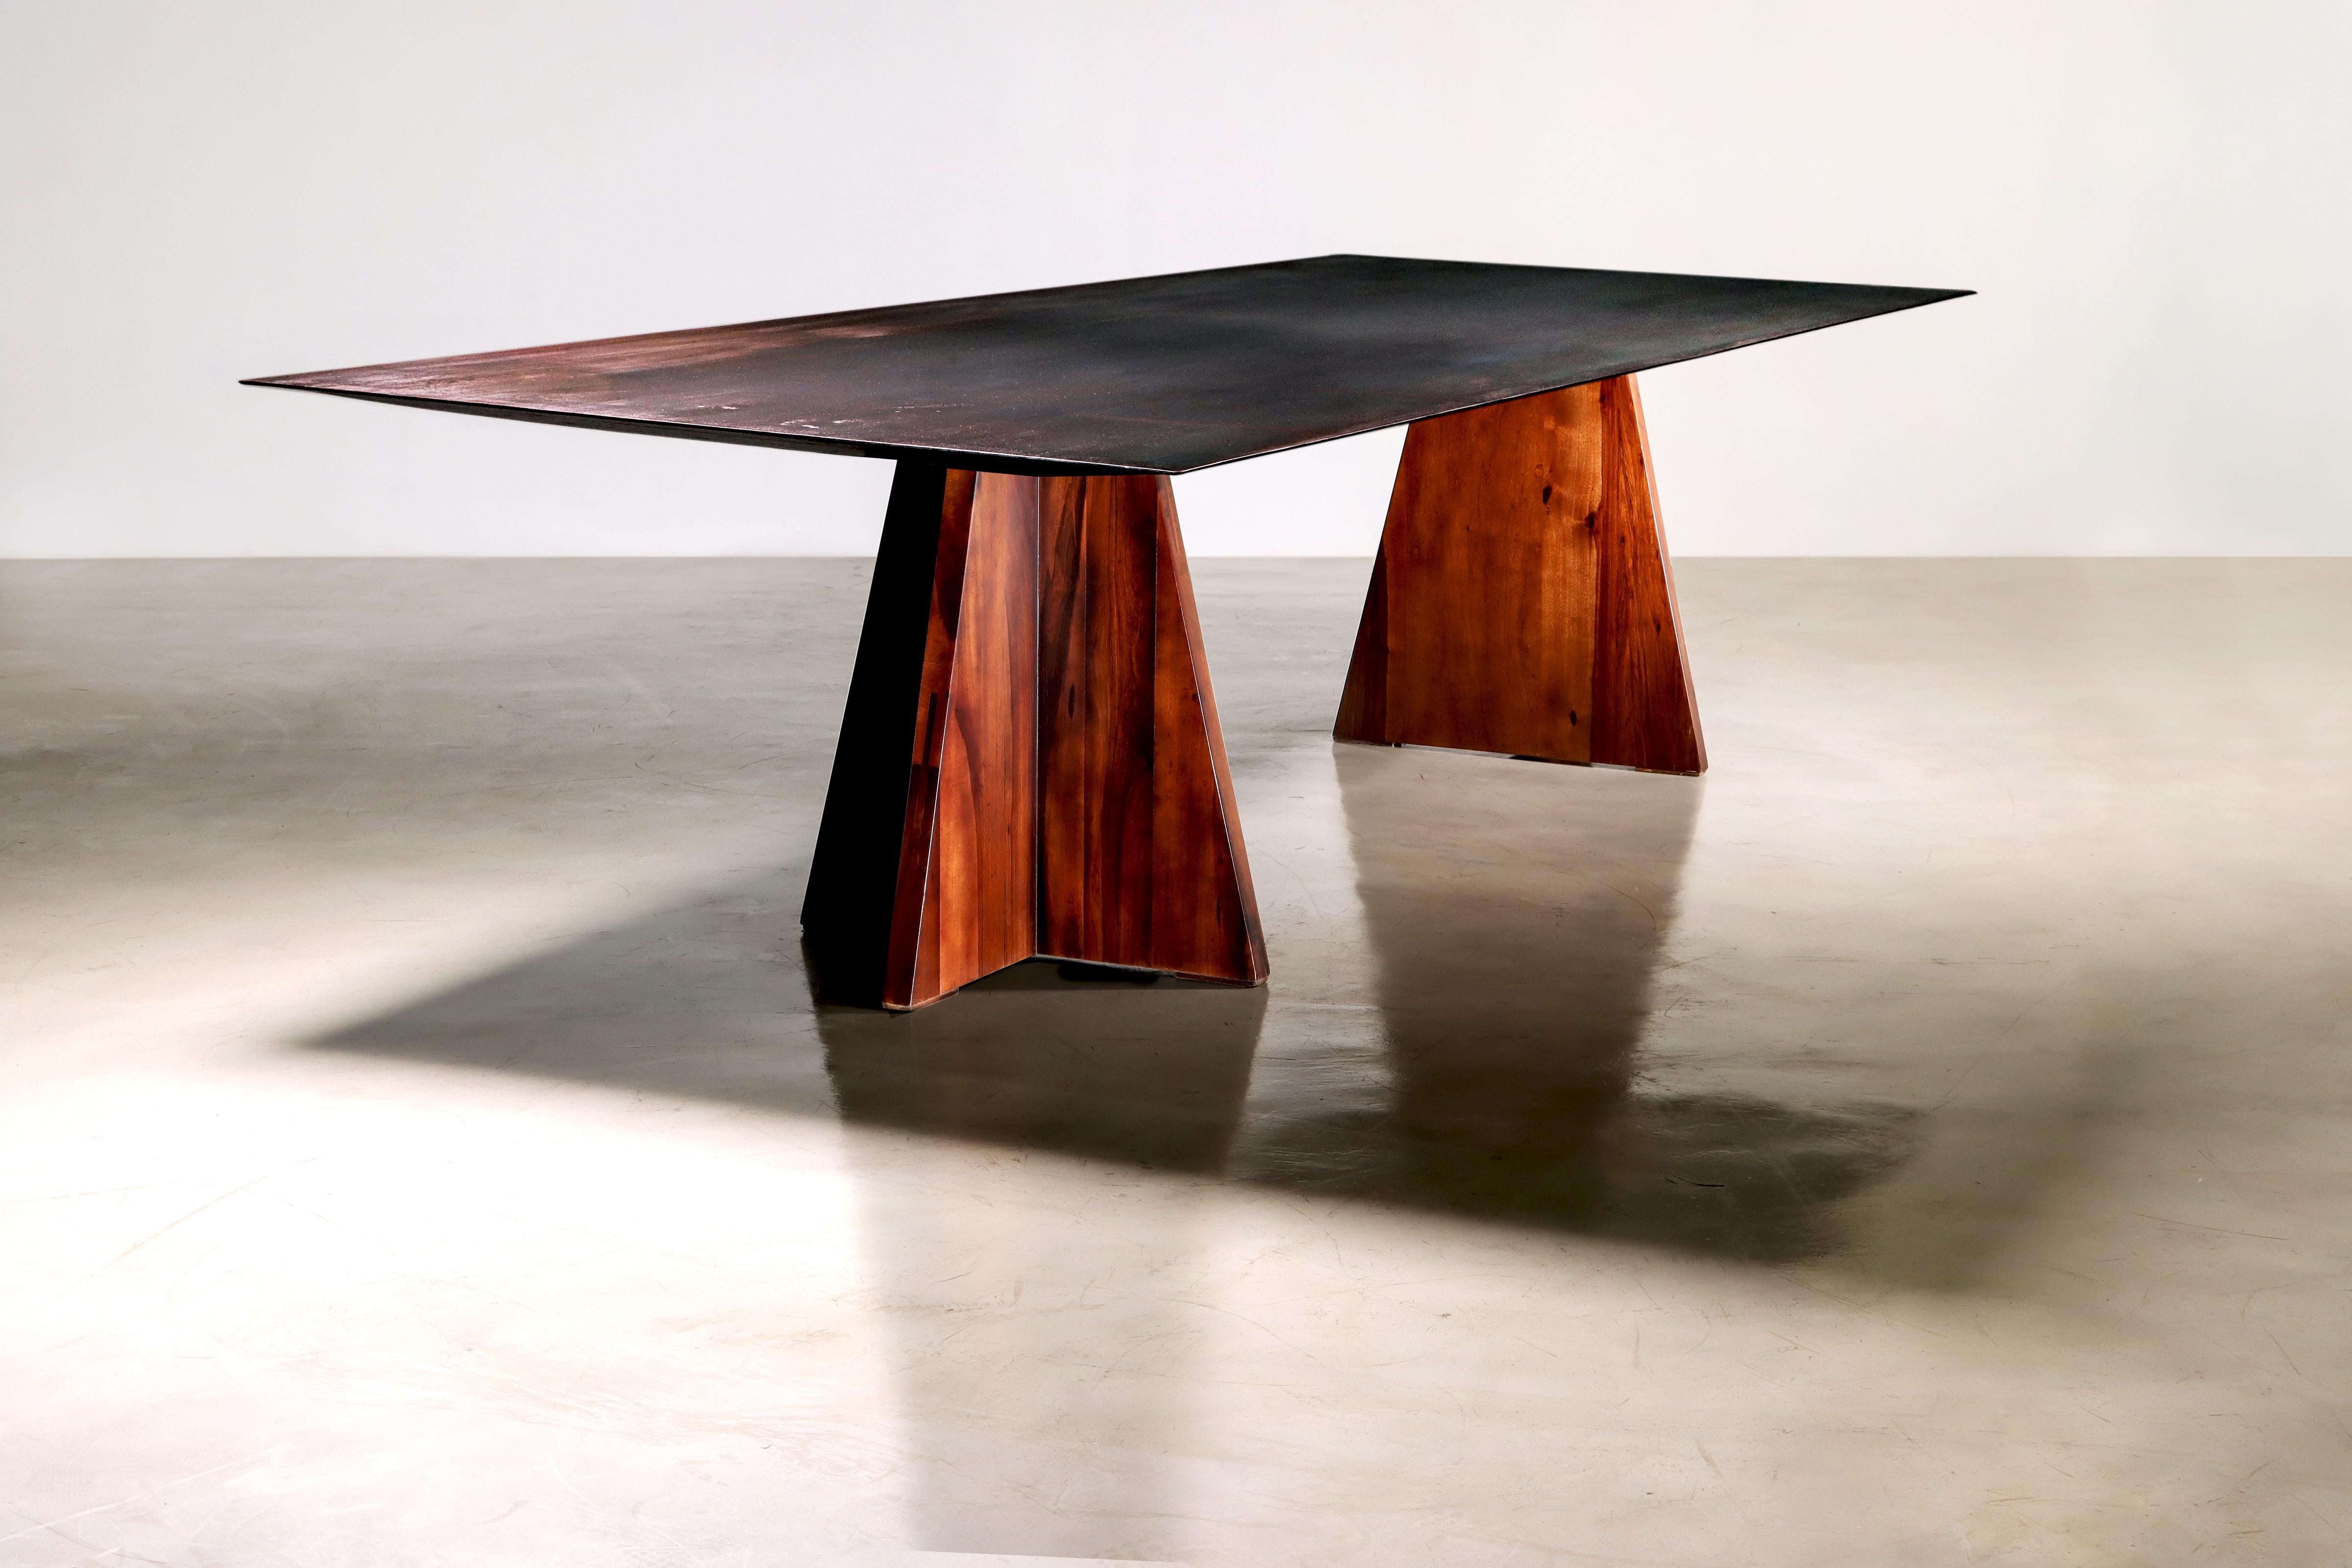 This one of a kind table is inspired by the massive sculptures of cold rolled steel by Richard Serra. The raw iron top was allowed to oxidize for several years before we applied a wax coating to lock in the textures. 

Available now as shown for